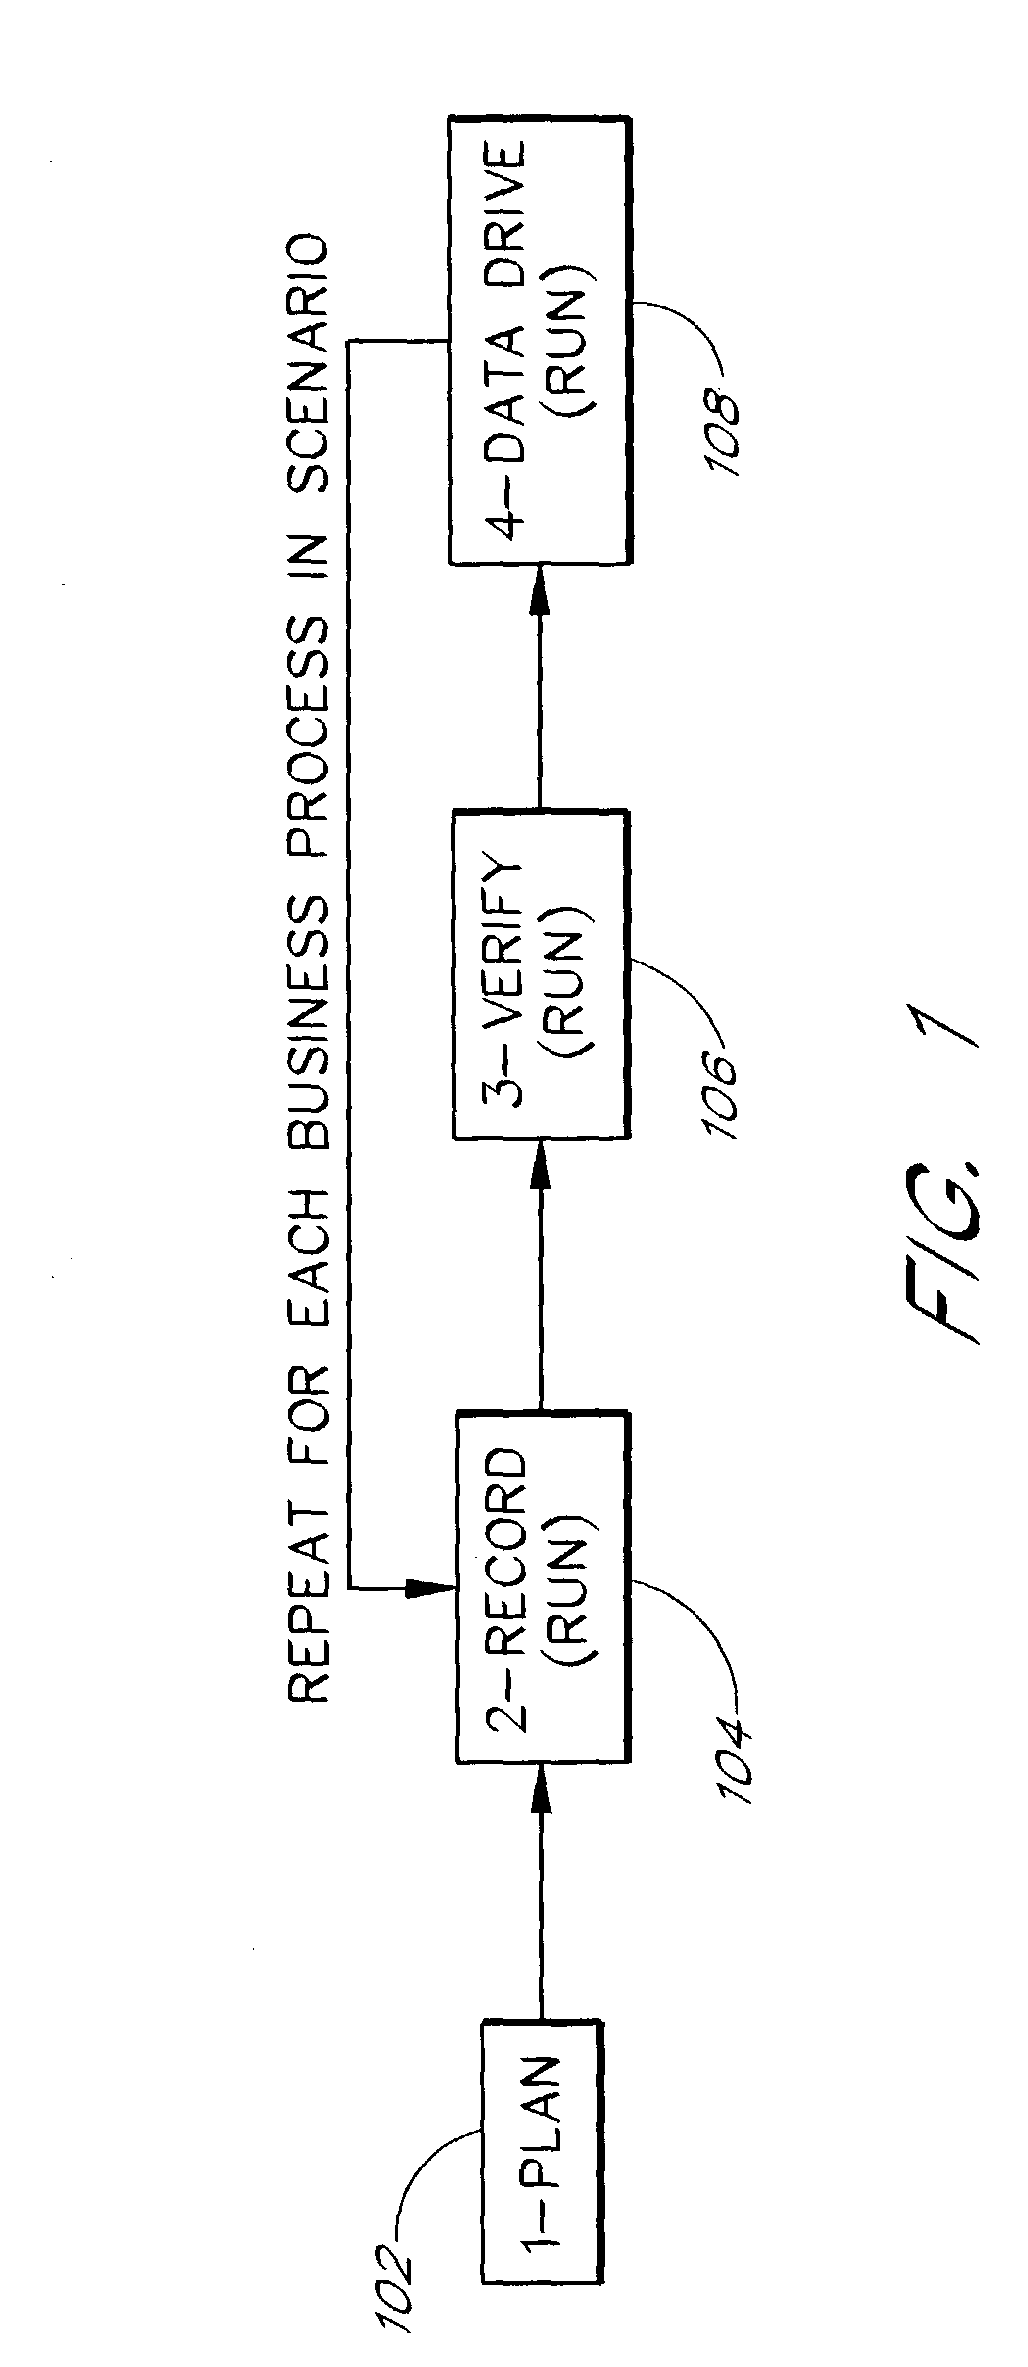 Software system and methods for testing transactional servers